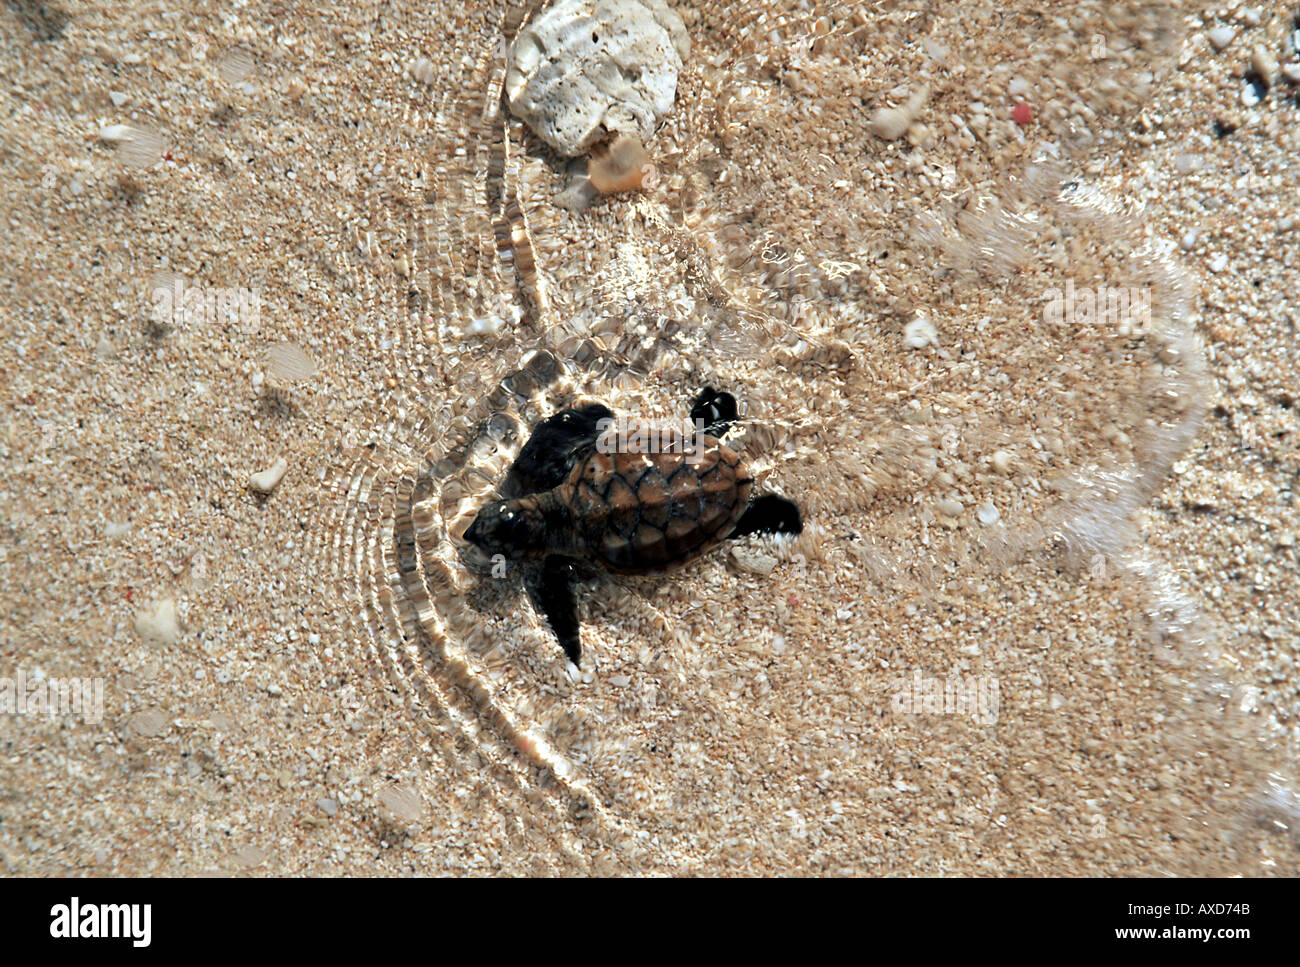 A just hatched Hawksbill turtle Eretmochelys imbricata making its way across the sand to the ocean Fiji  Stock Photo